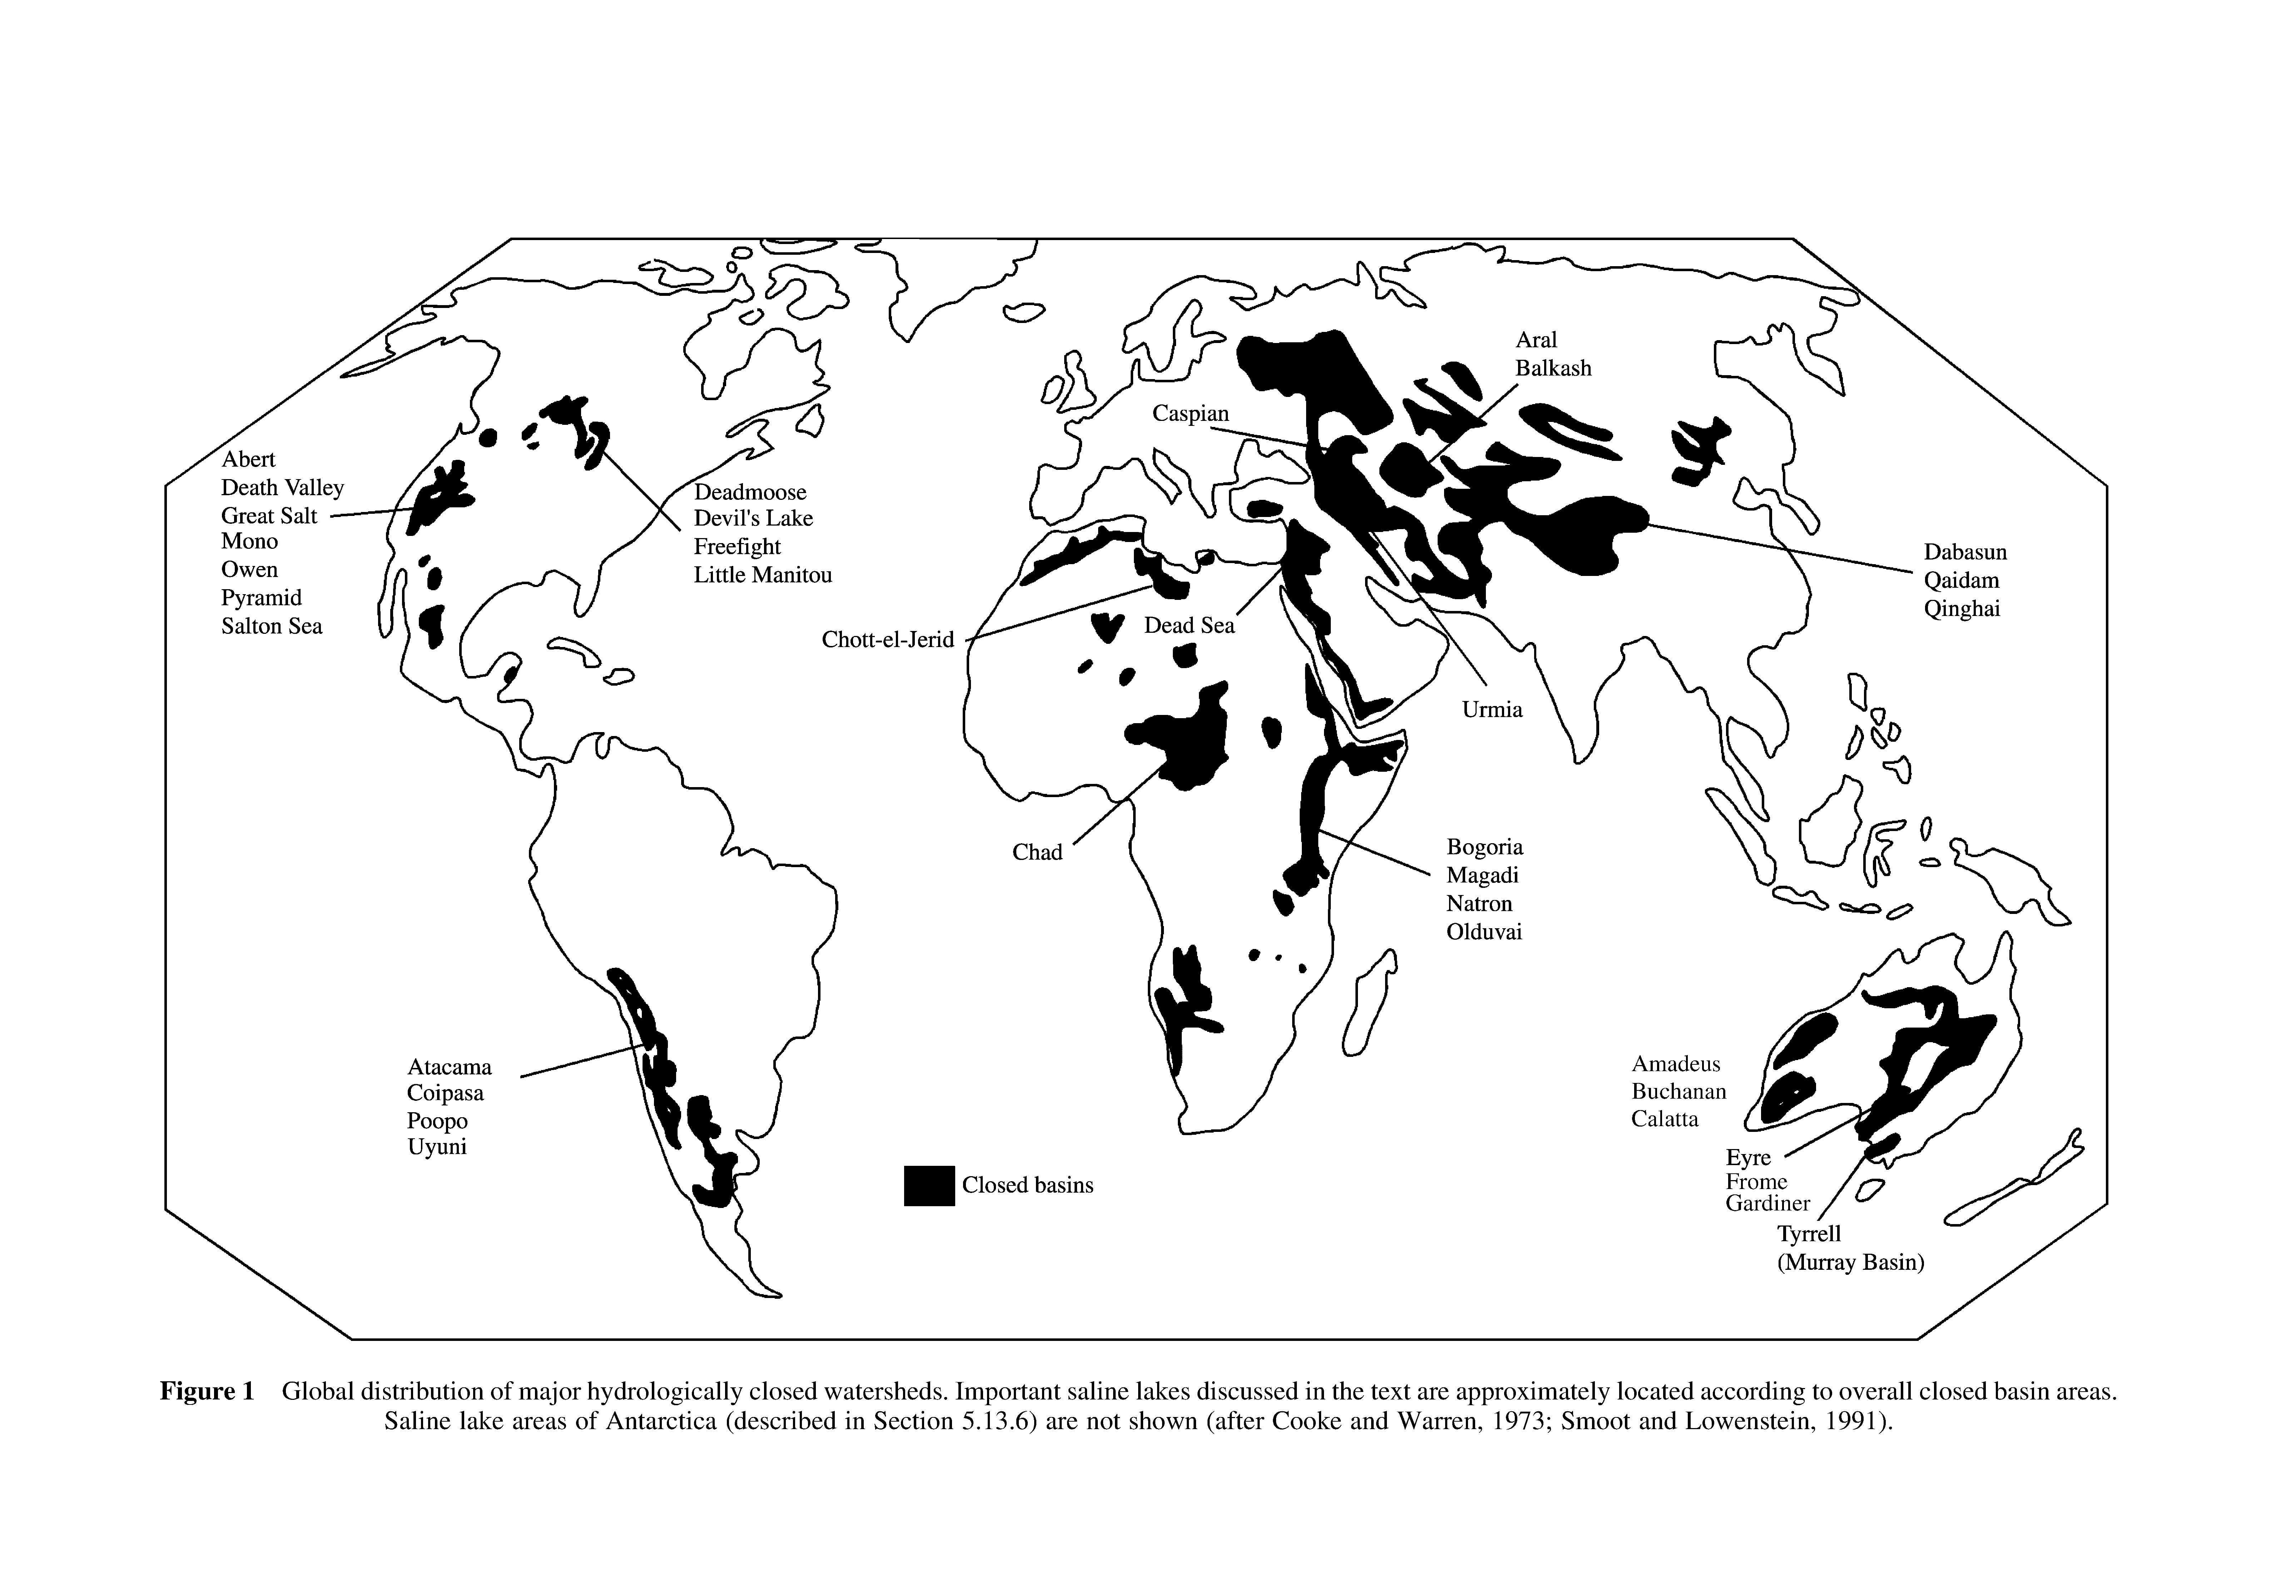 Figure 1 Global distribution of major hydrologically closed watersheds. Important saline lakes discussed in the text are approximately located according to overall closed basin areas. Saline lake areas of Antarctica (described in Section 5.13.6) are not shown (after Cooke and Warren, 1973 Smoot and Lowenstein, 1991).